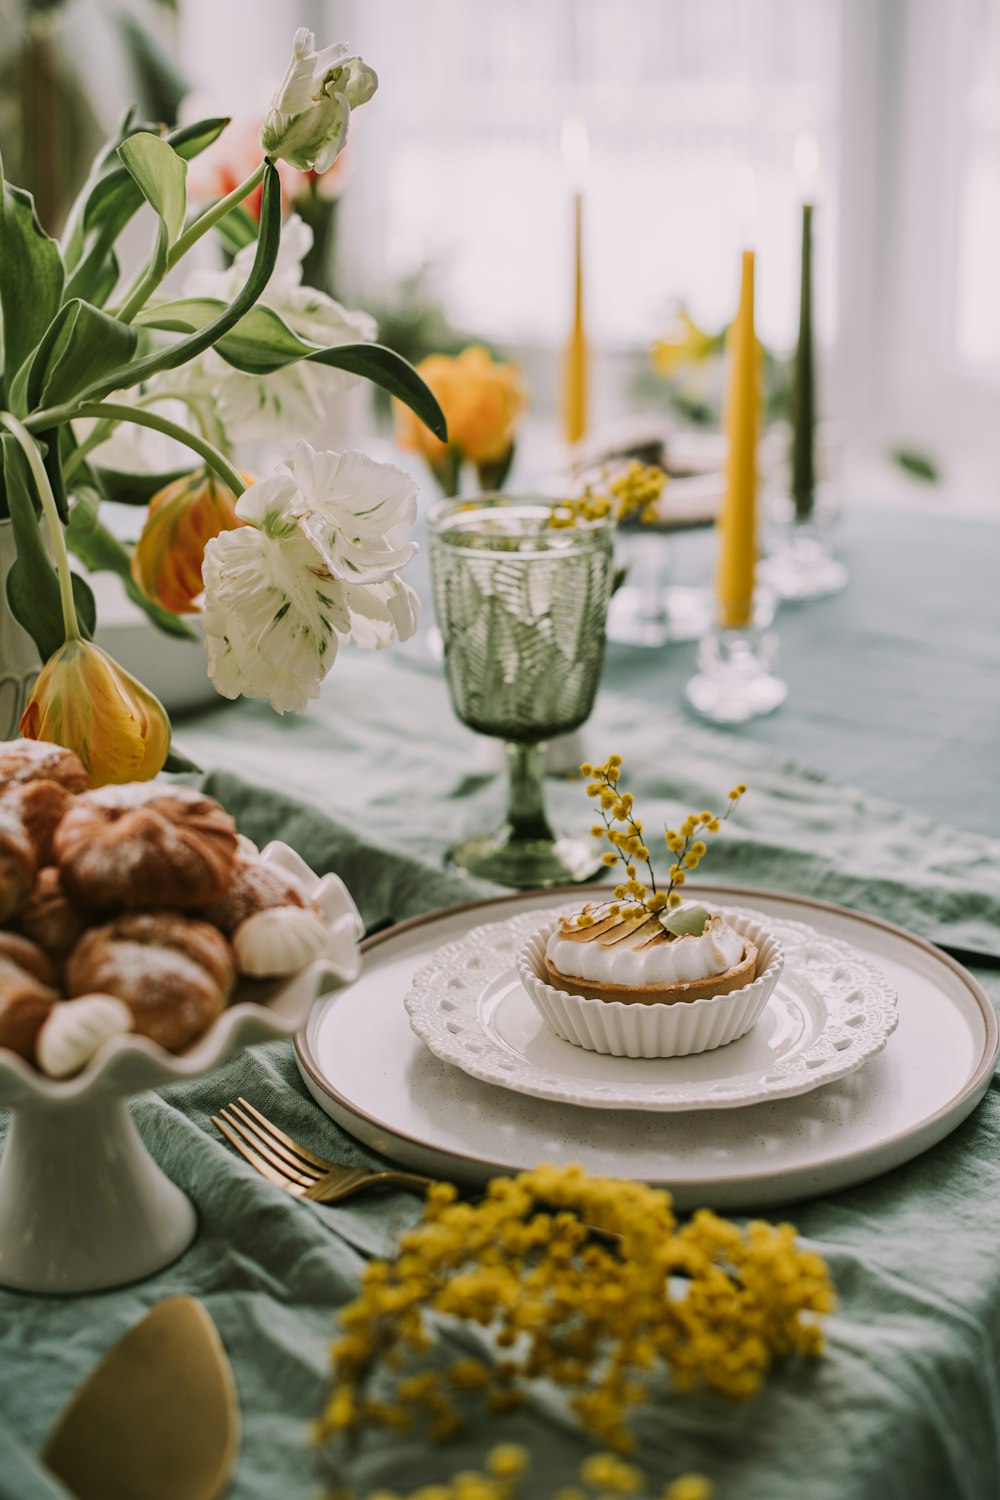 a table topped with a cupcake next to a vase of flowers